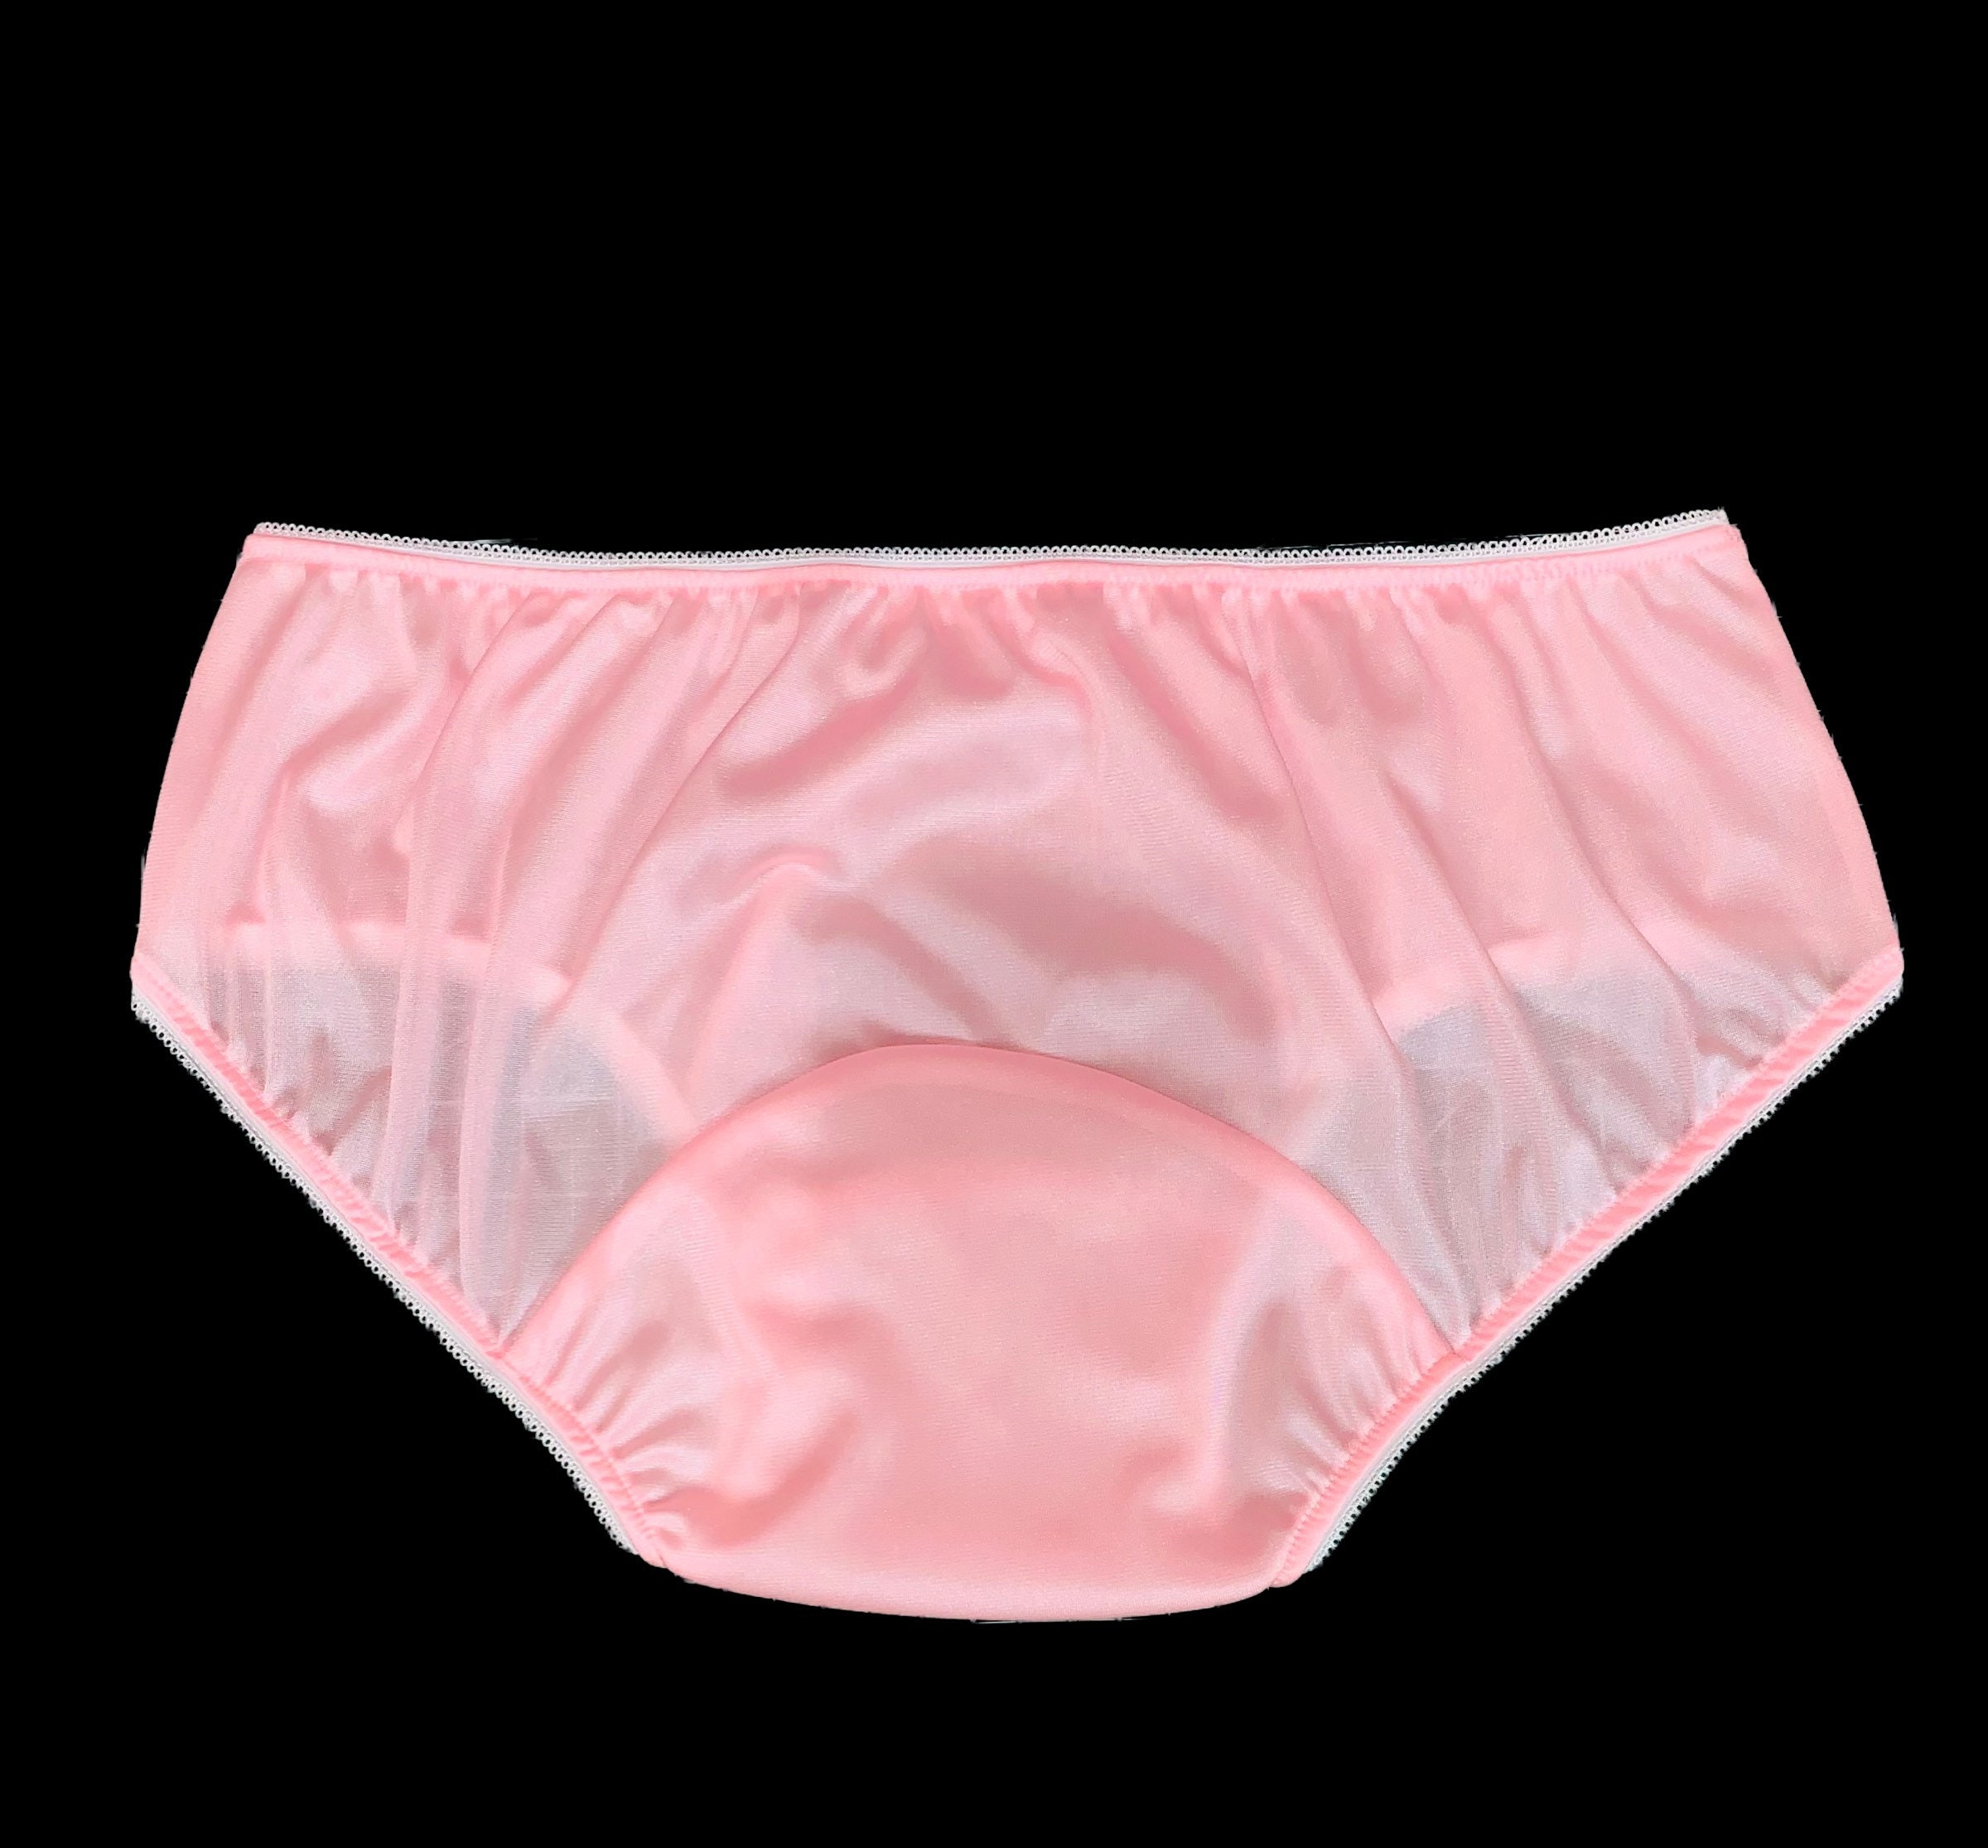 PINK Nylon Tricot Brief Panties With Large Mushroom Double Gusset